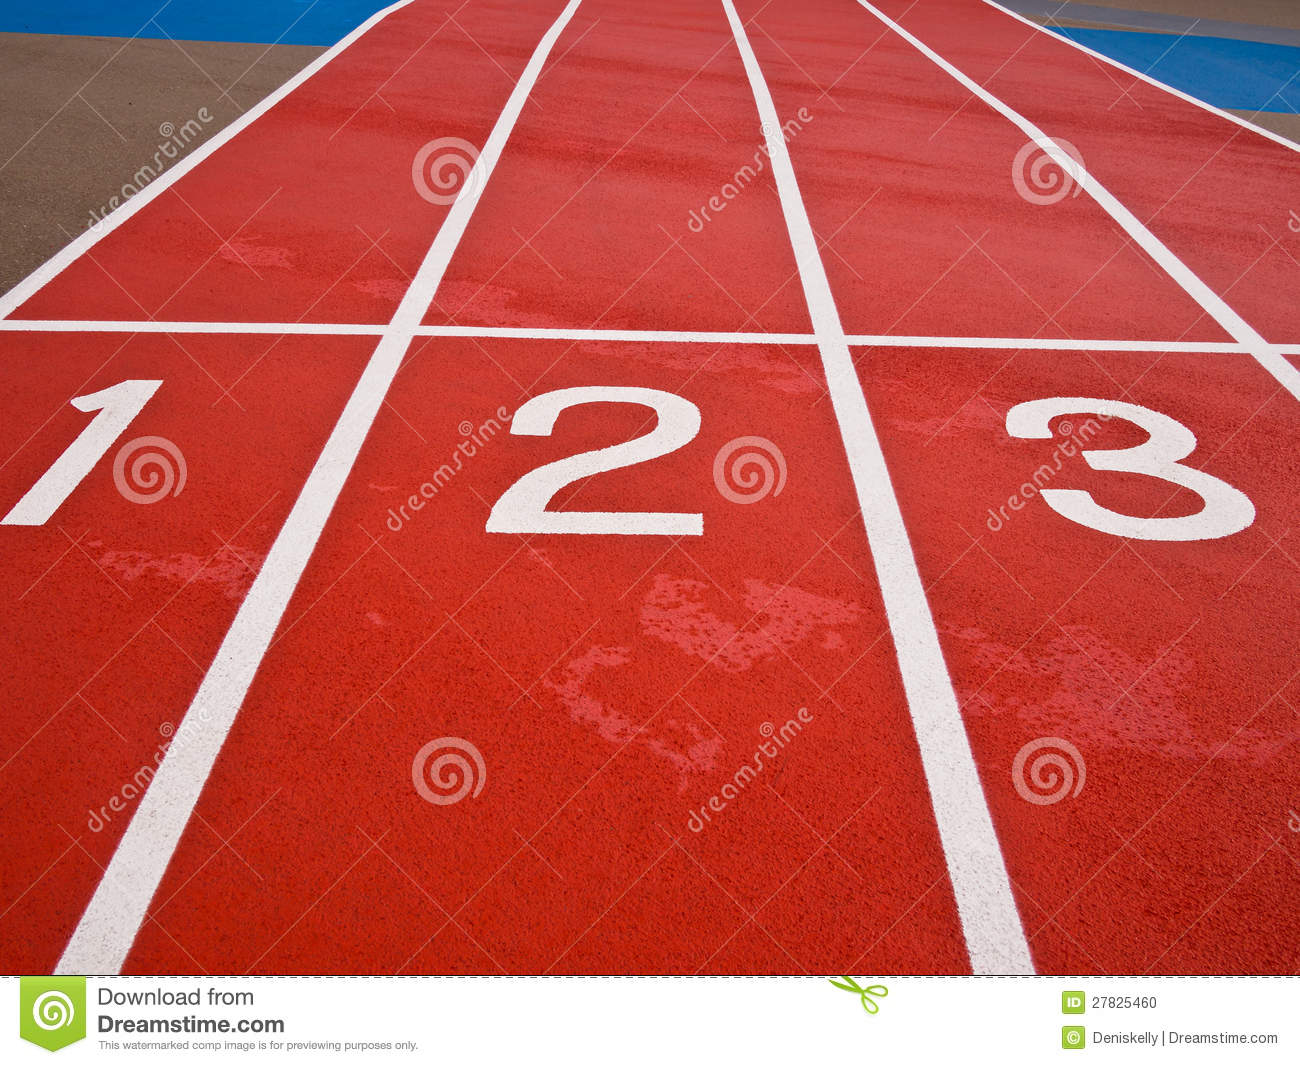 Athletics Race Track With Numbered Lanes Marked In White On An Orange    